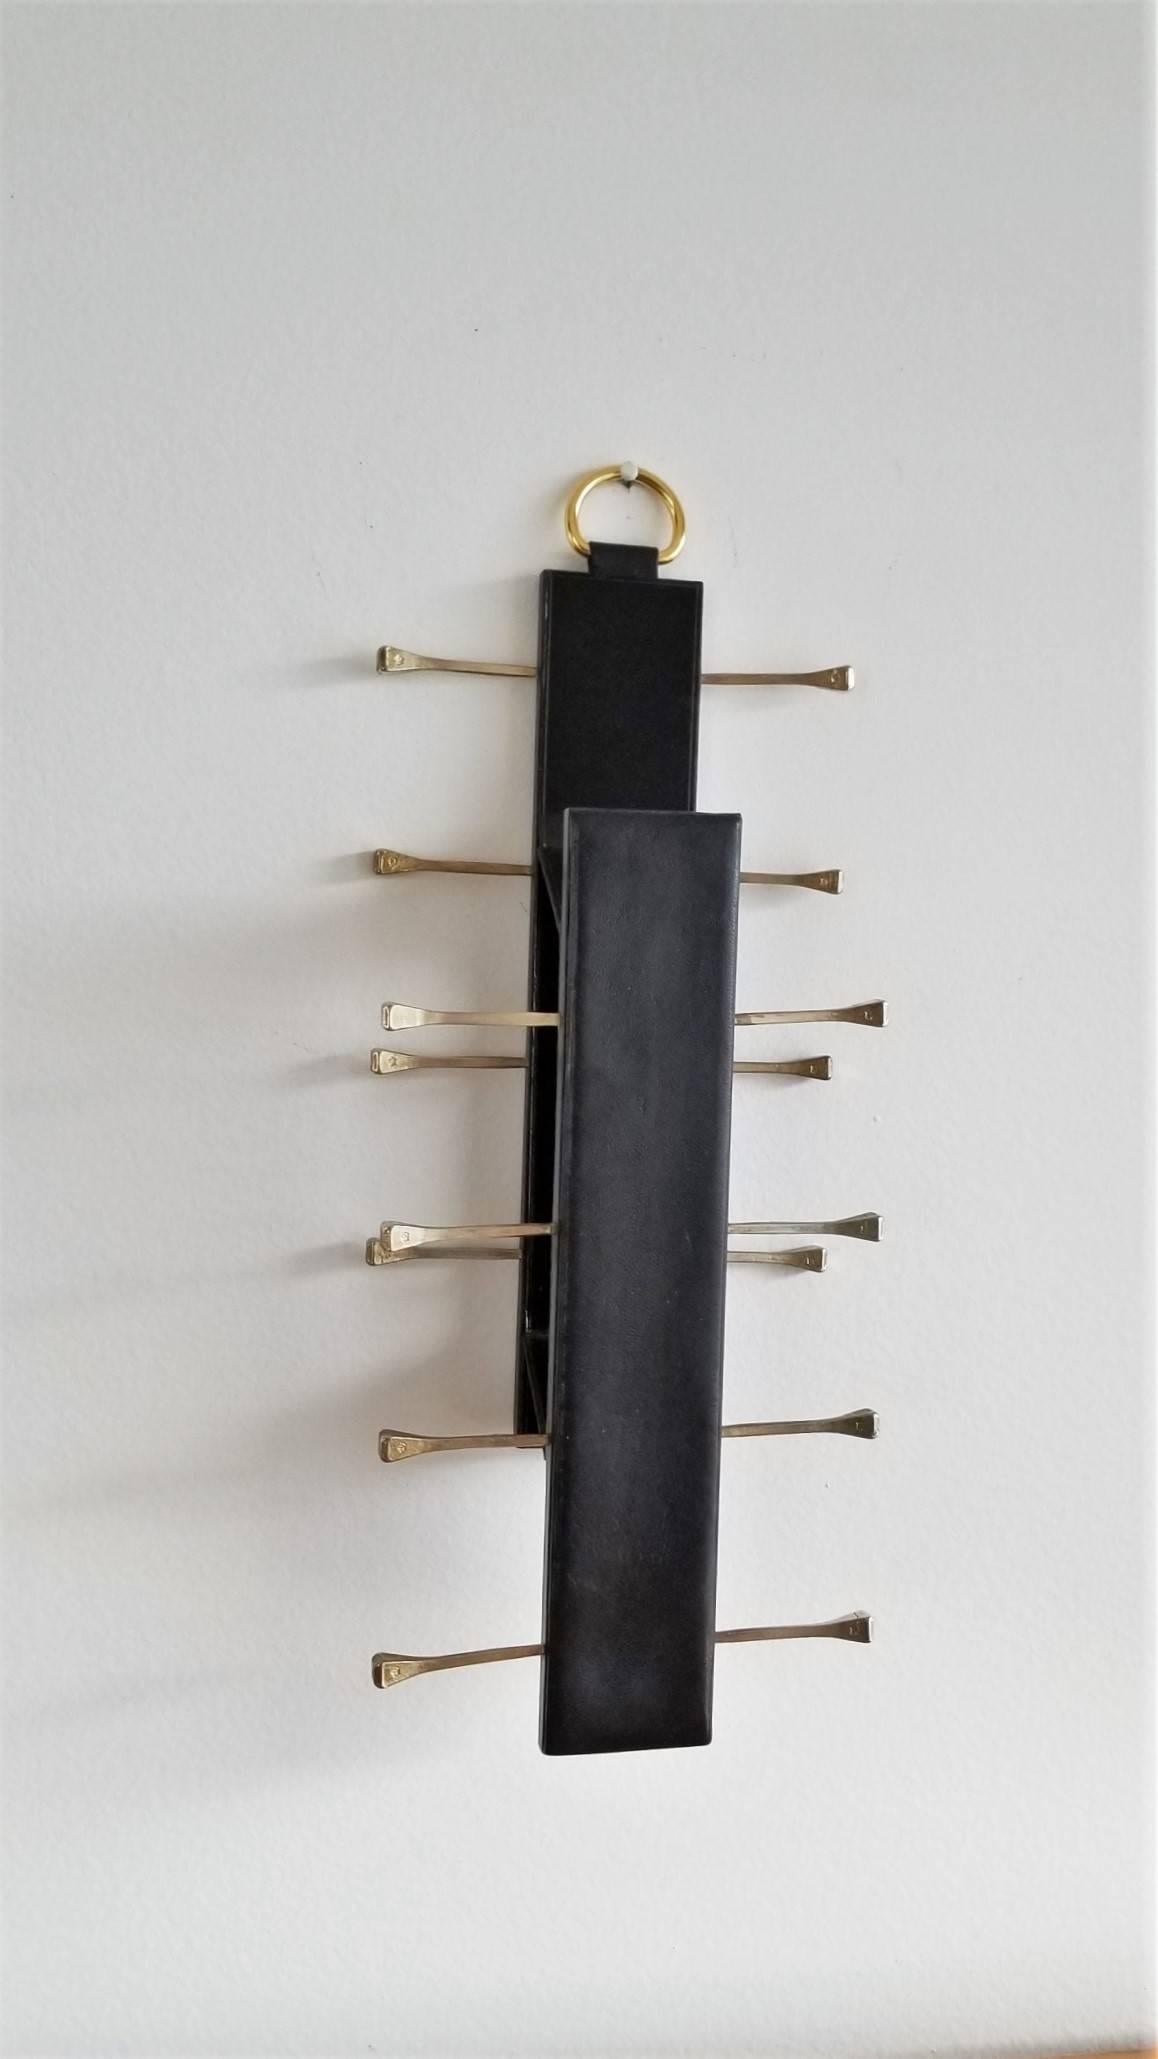 In the style of Adnet
unfolding two tiered rack
top brass hook
Measure: depth 7cm when unfolded.
 
Price does not include shipping and possible customs related charges.